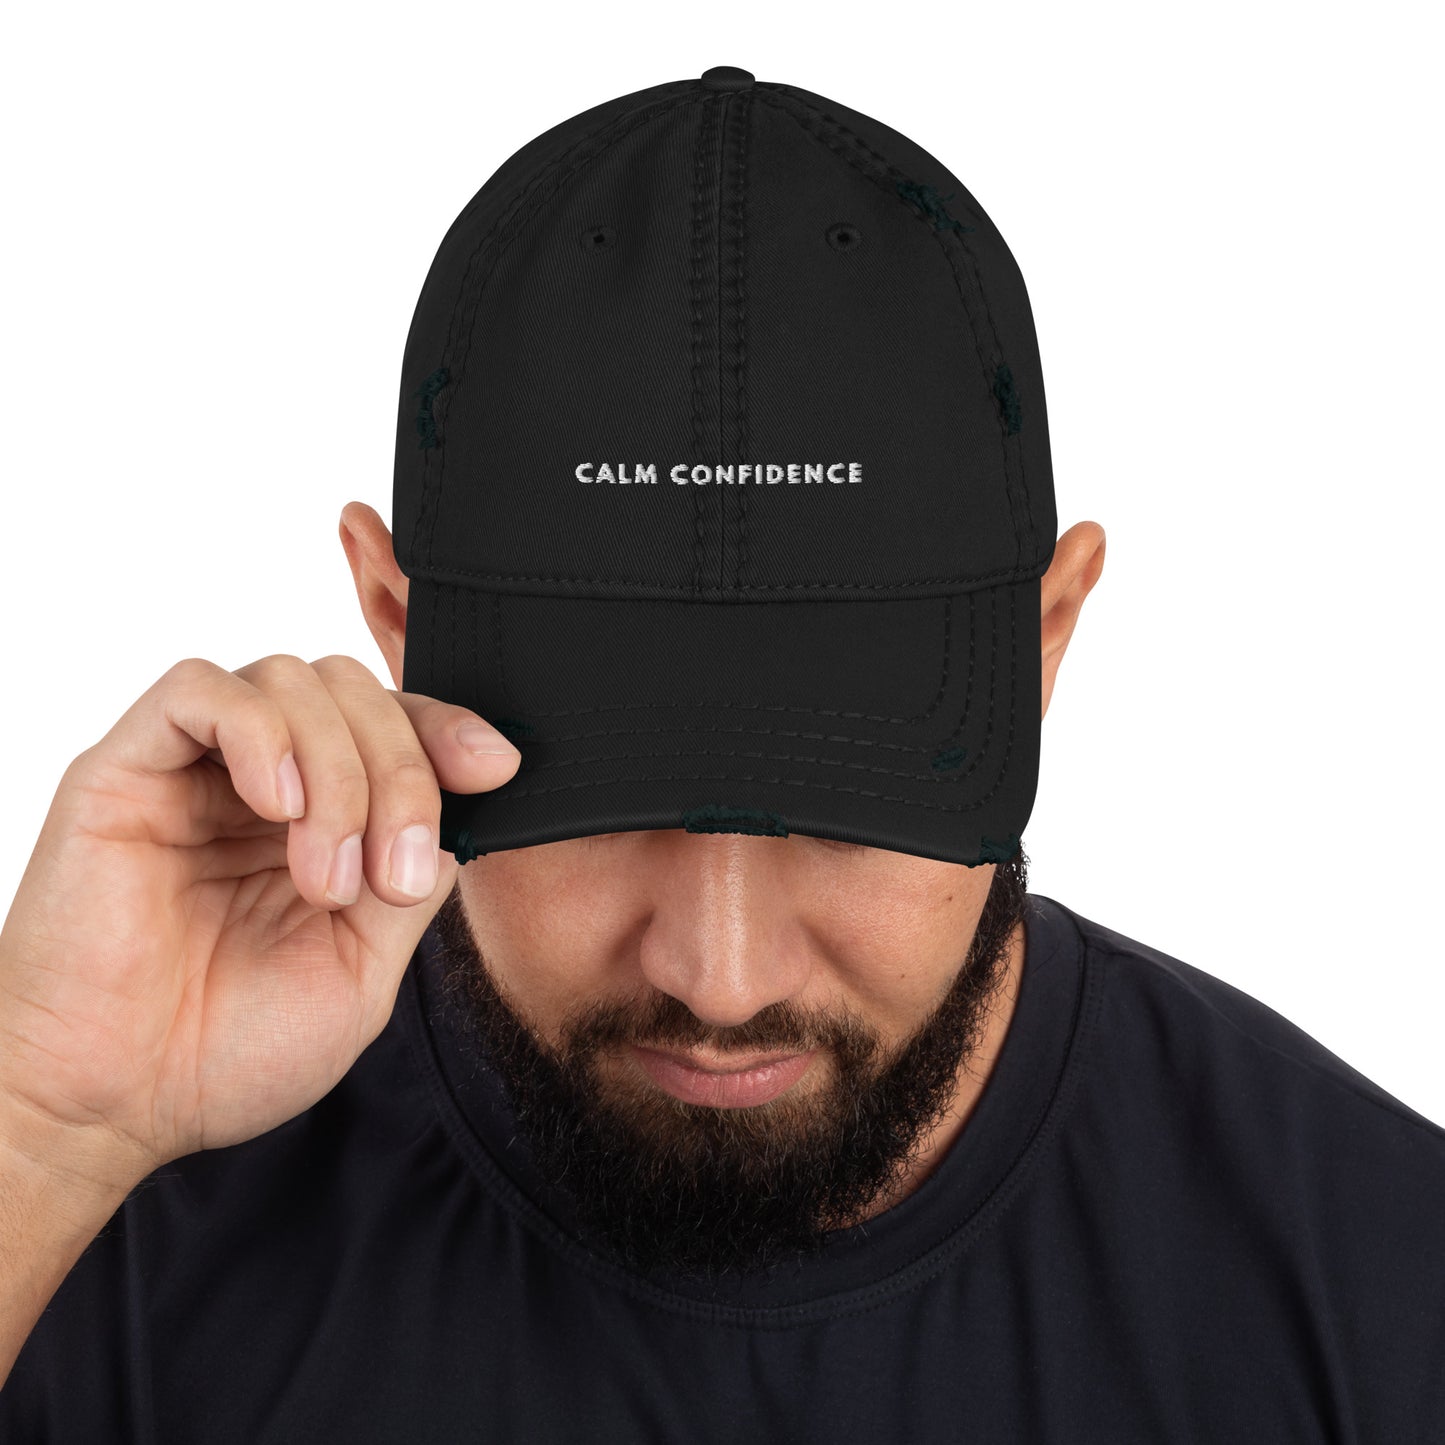 Calm Confidence - Distressed Dad Hat